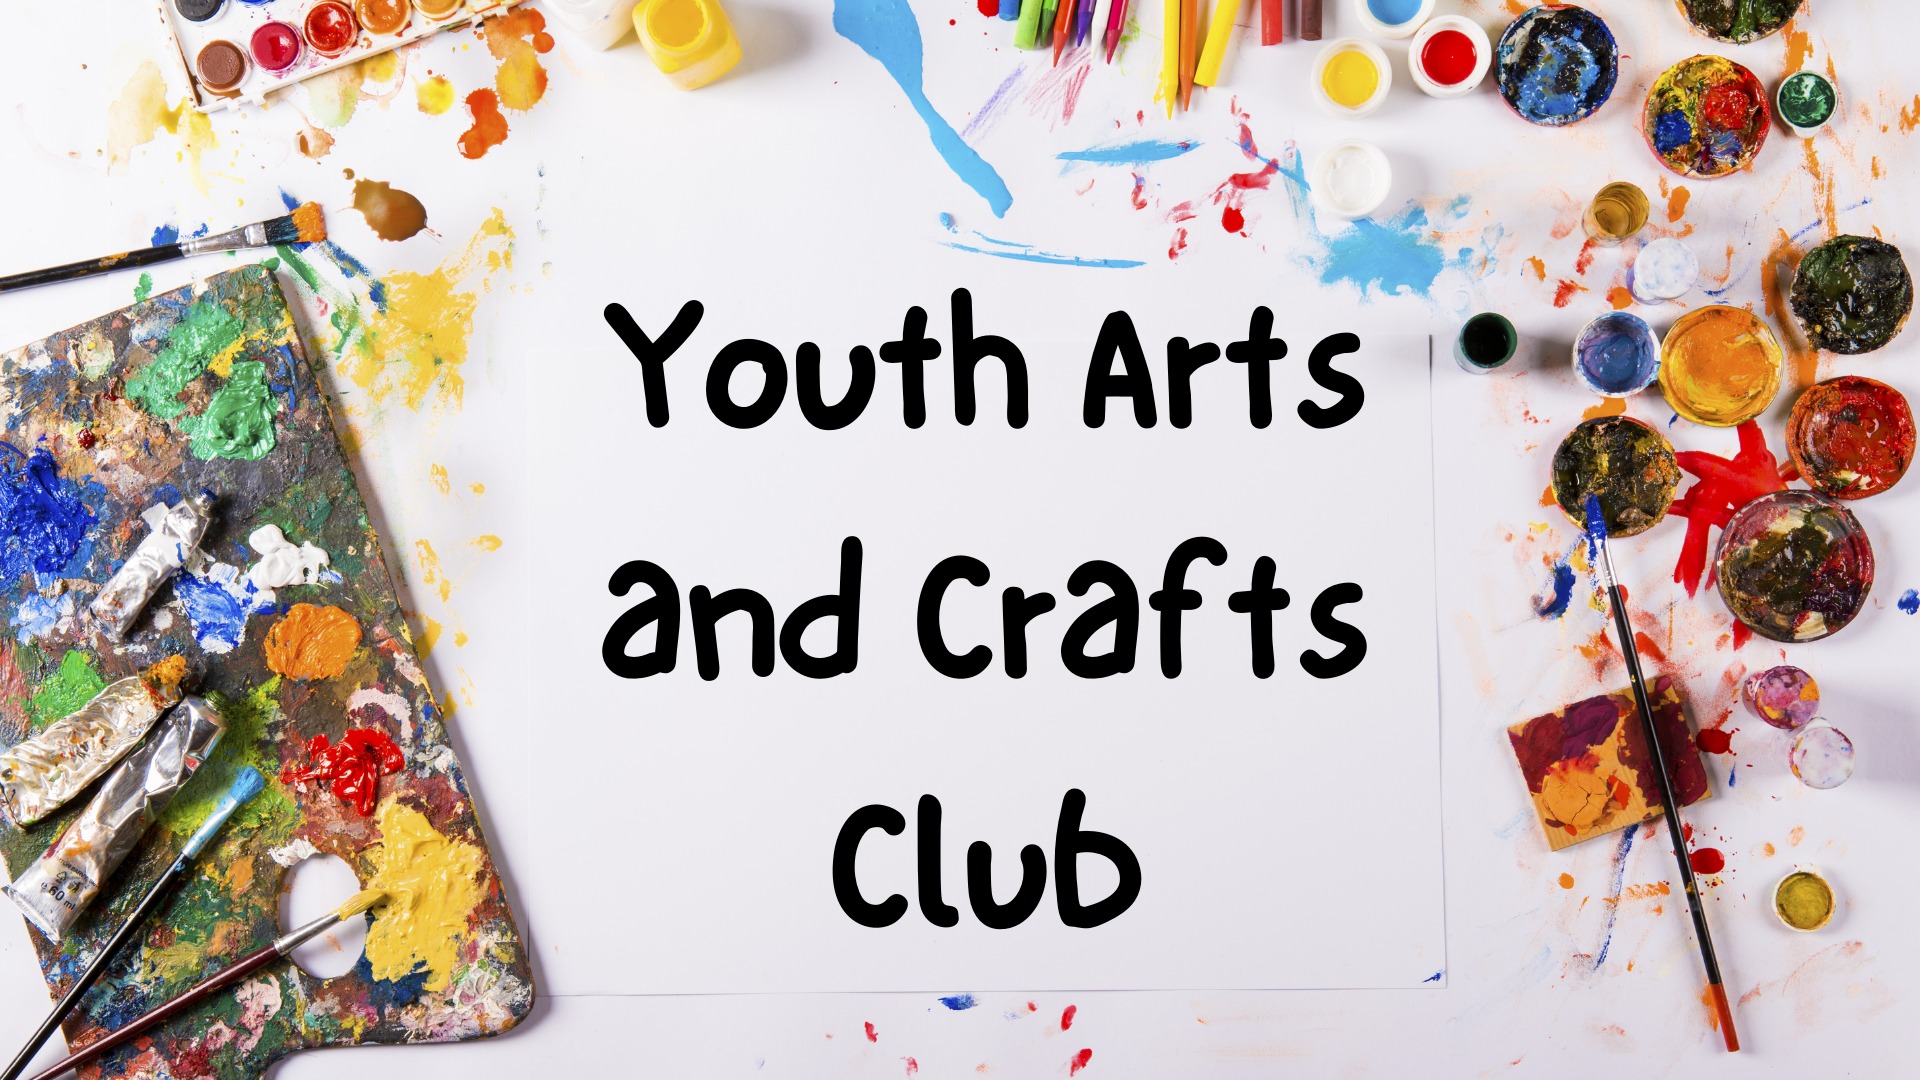 <h1 class="tribe-events-single-event-title">Youth Arts and Crafts Club</h1>